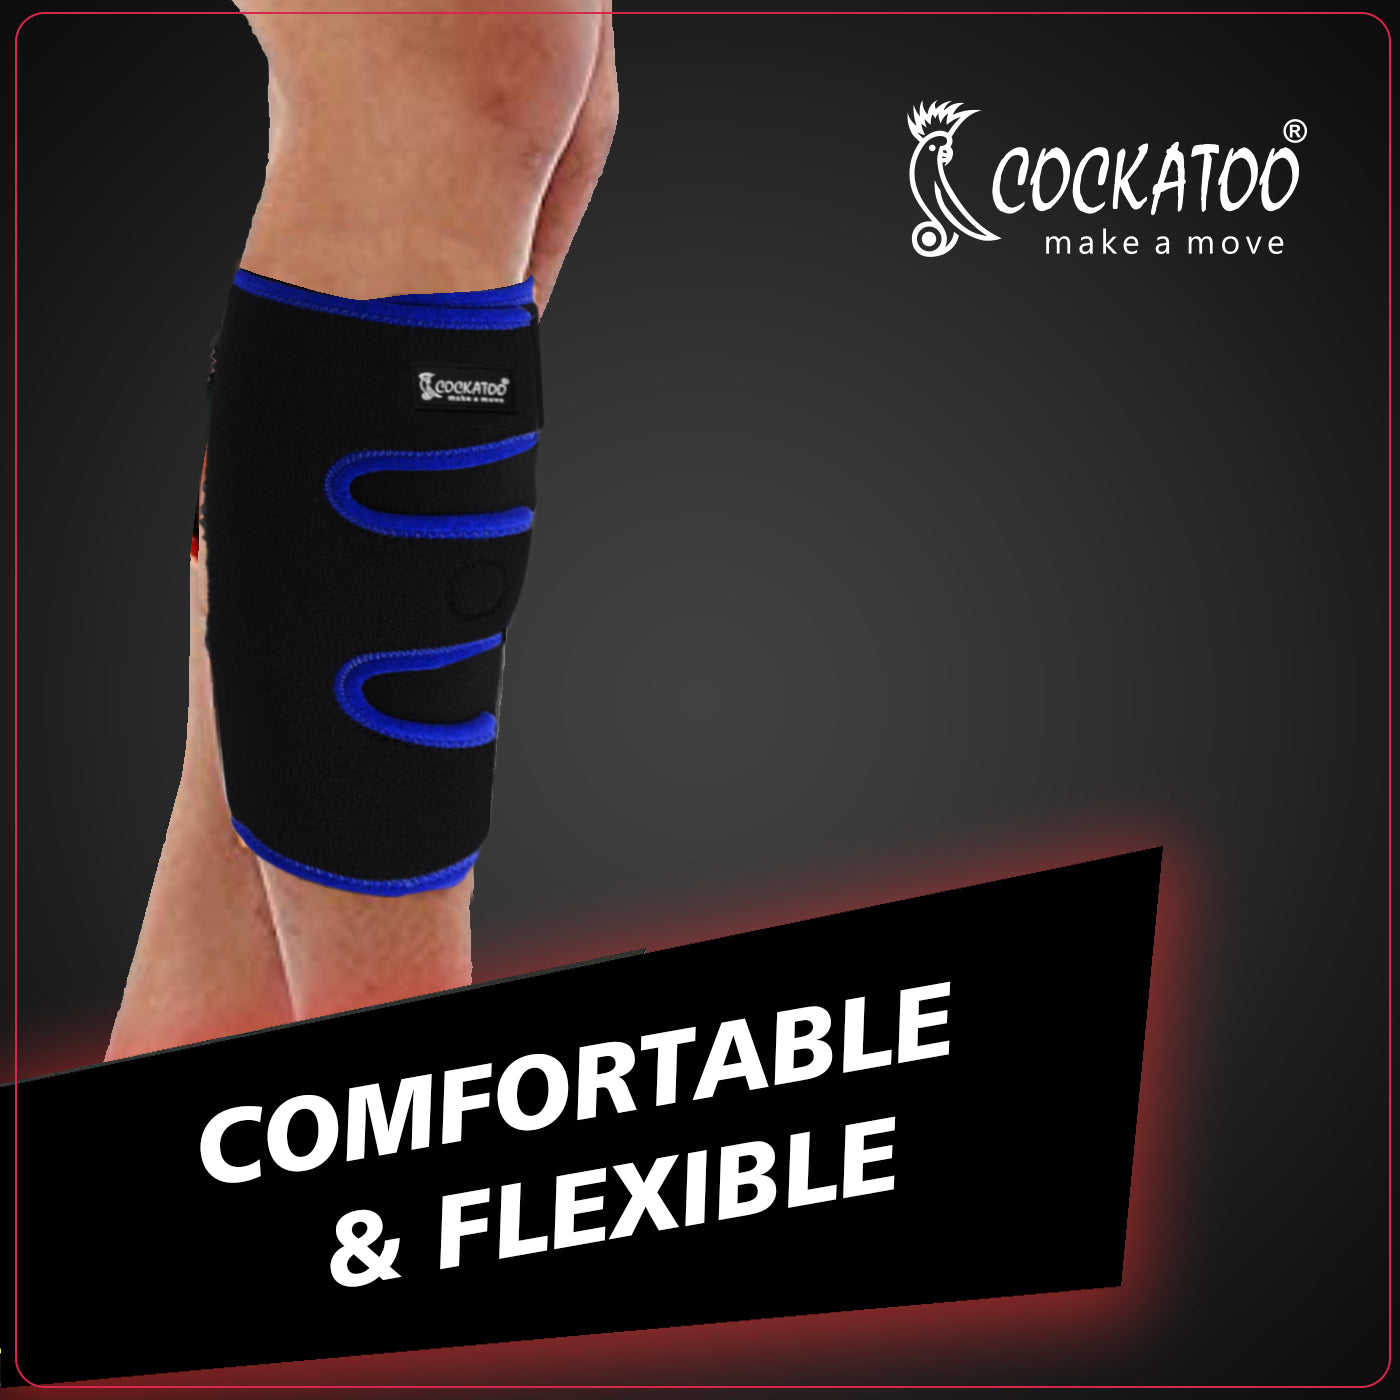 Cockatoo Calf Support Brace - Shin Splint Compression Sleeve - Lower Leg  Wrap Support for Torn Calf Muscle, Strain, Sprain, Pain Relief - Suitable  for